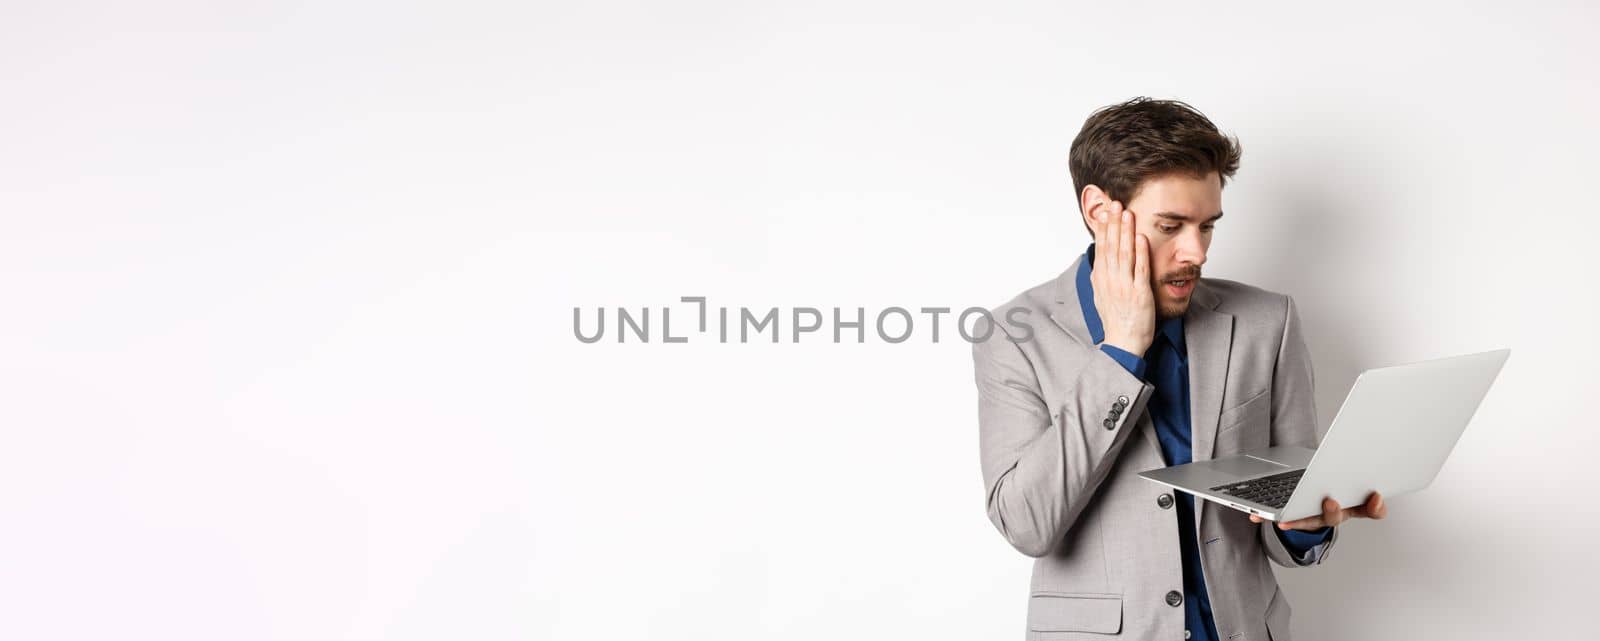 Shocked and worried businessman making mistake on laptop, looking at computer upset, standing on white background.